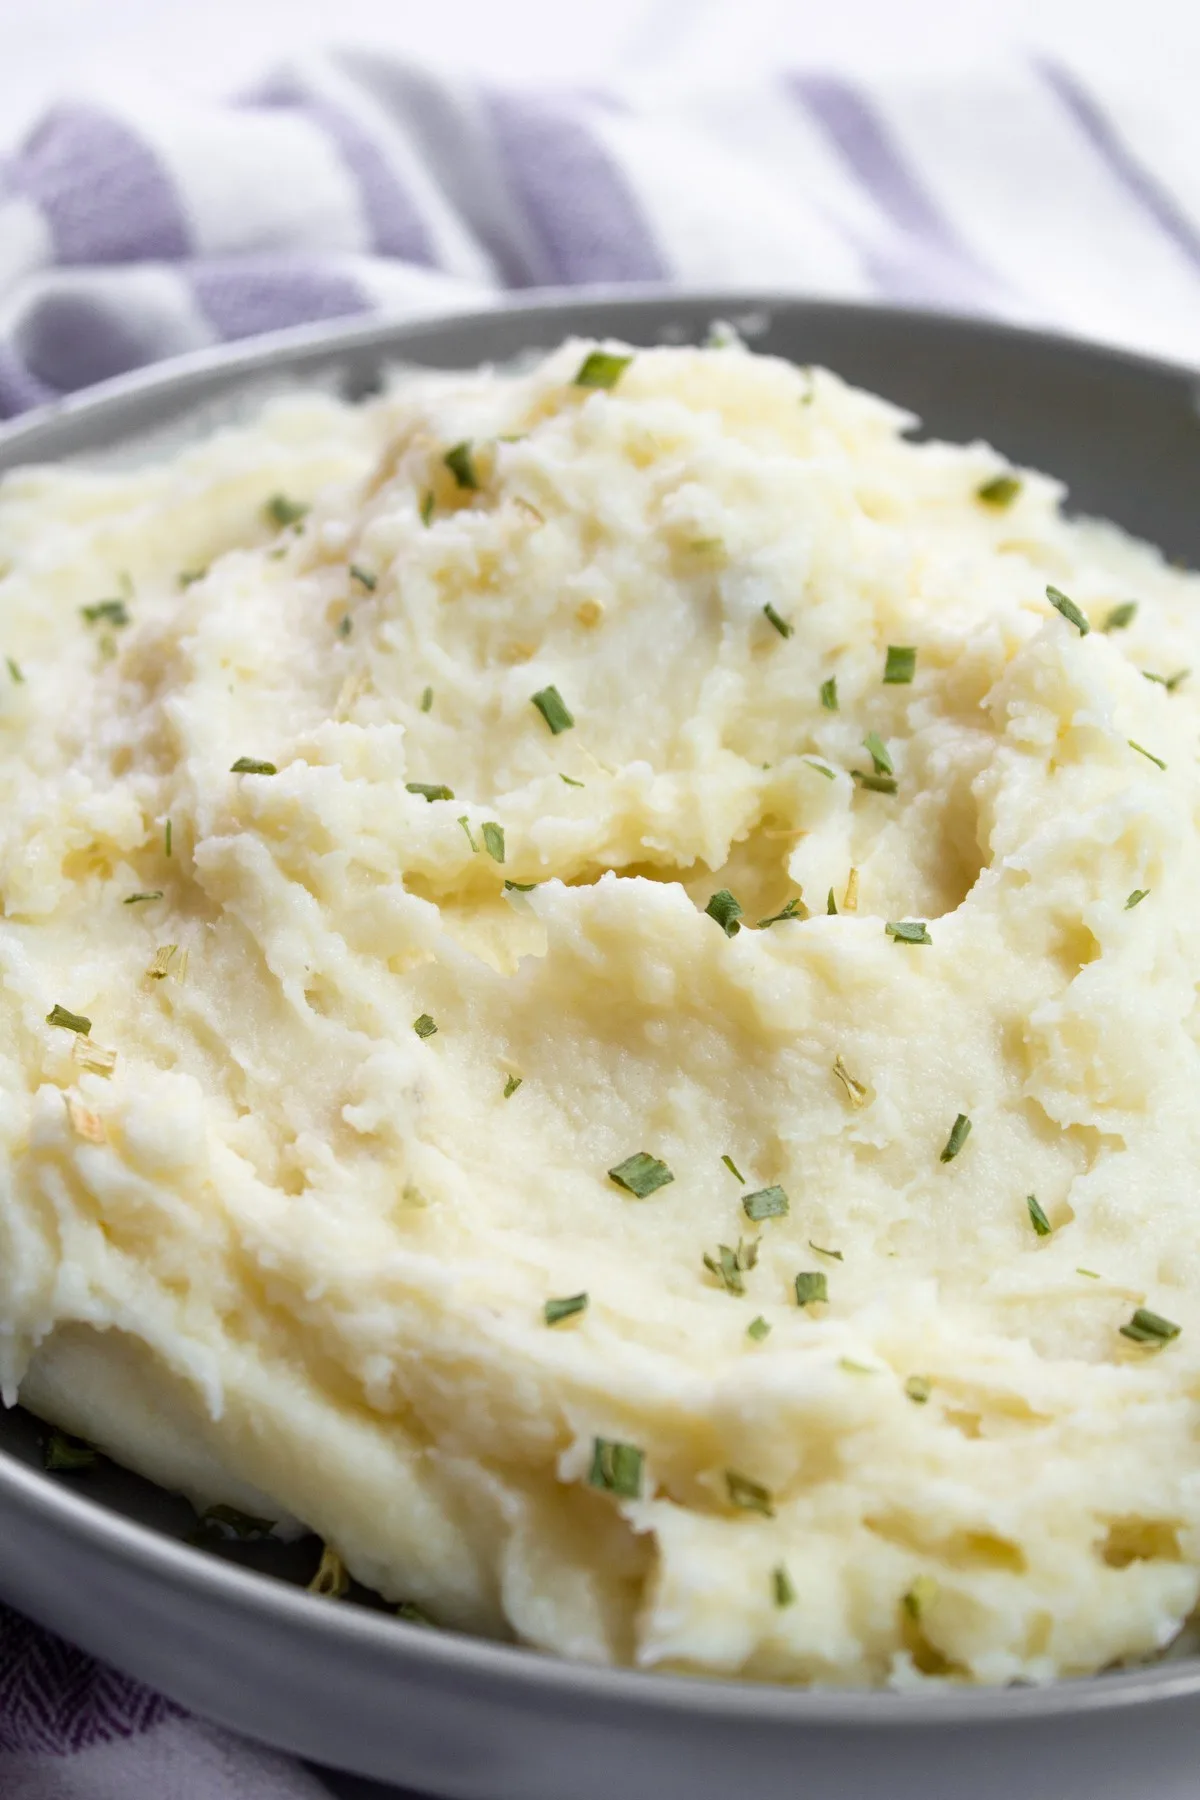 https://www.southerncravings.com/wp-content/uploads/IP-Mashed-Potatoes-28.jpg.webp